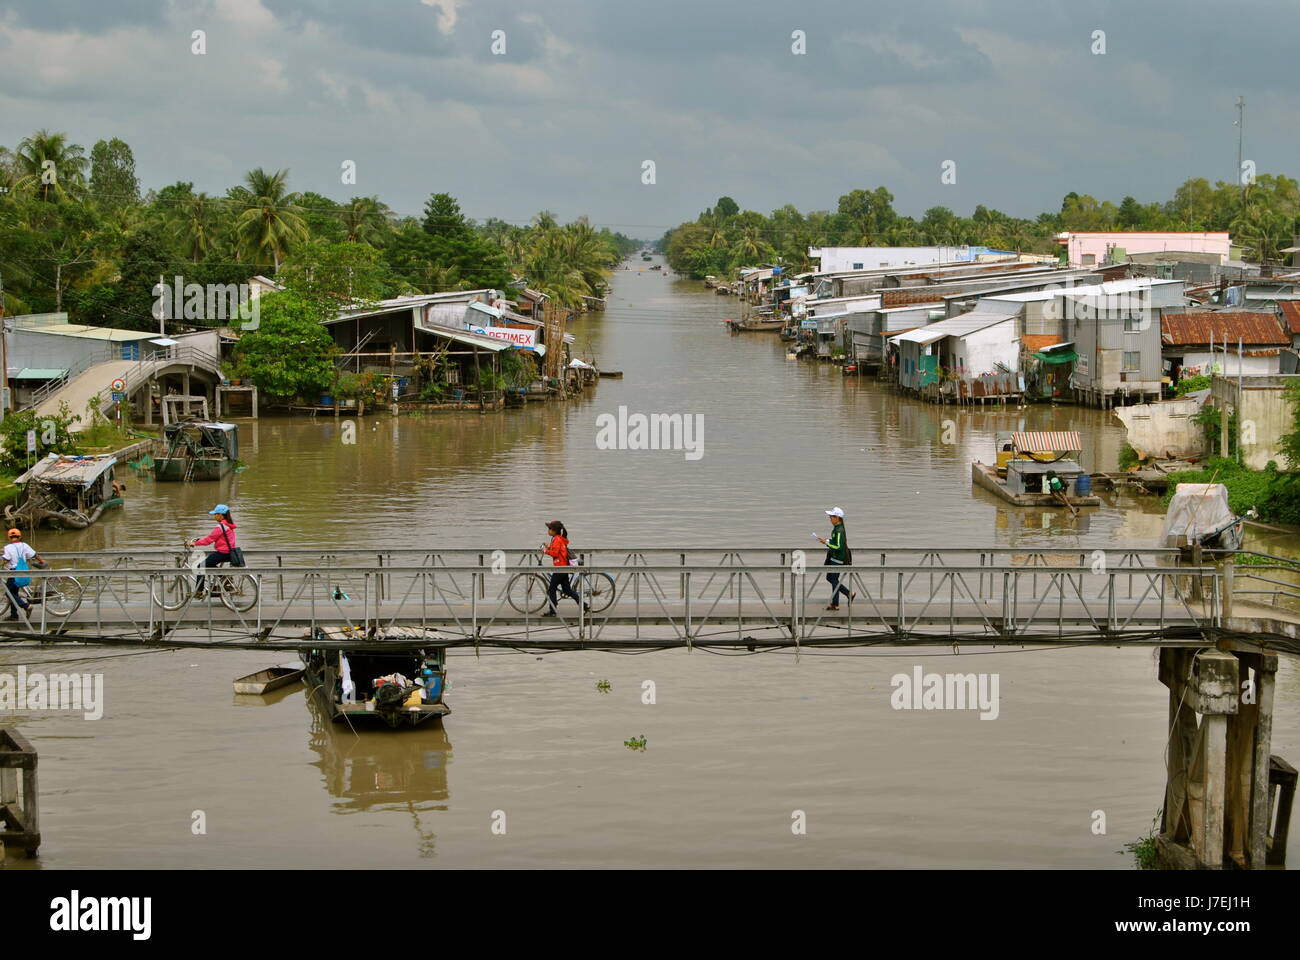 People on a bridge, Can Tho Province, Vietnam Stock Photo